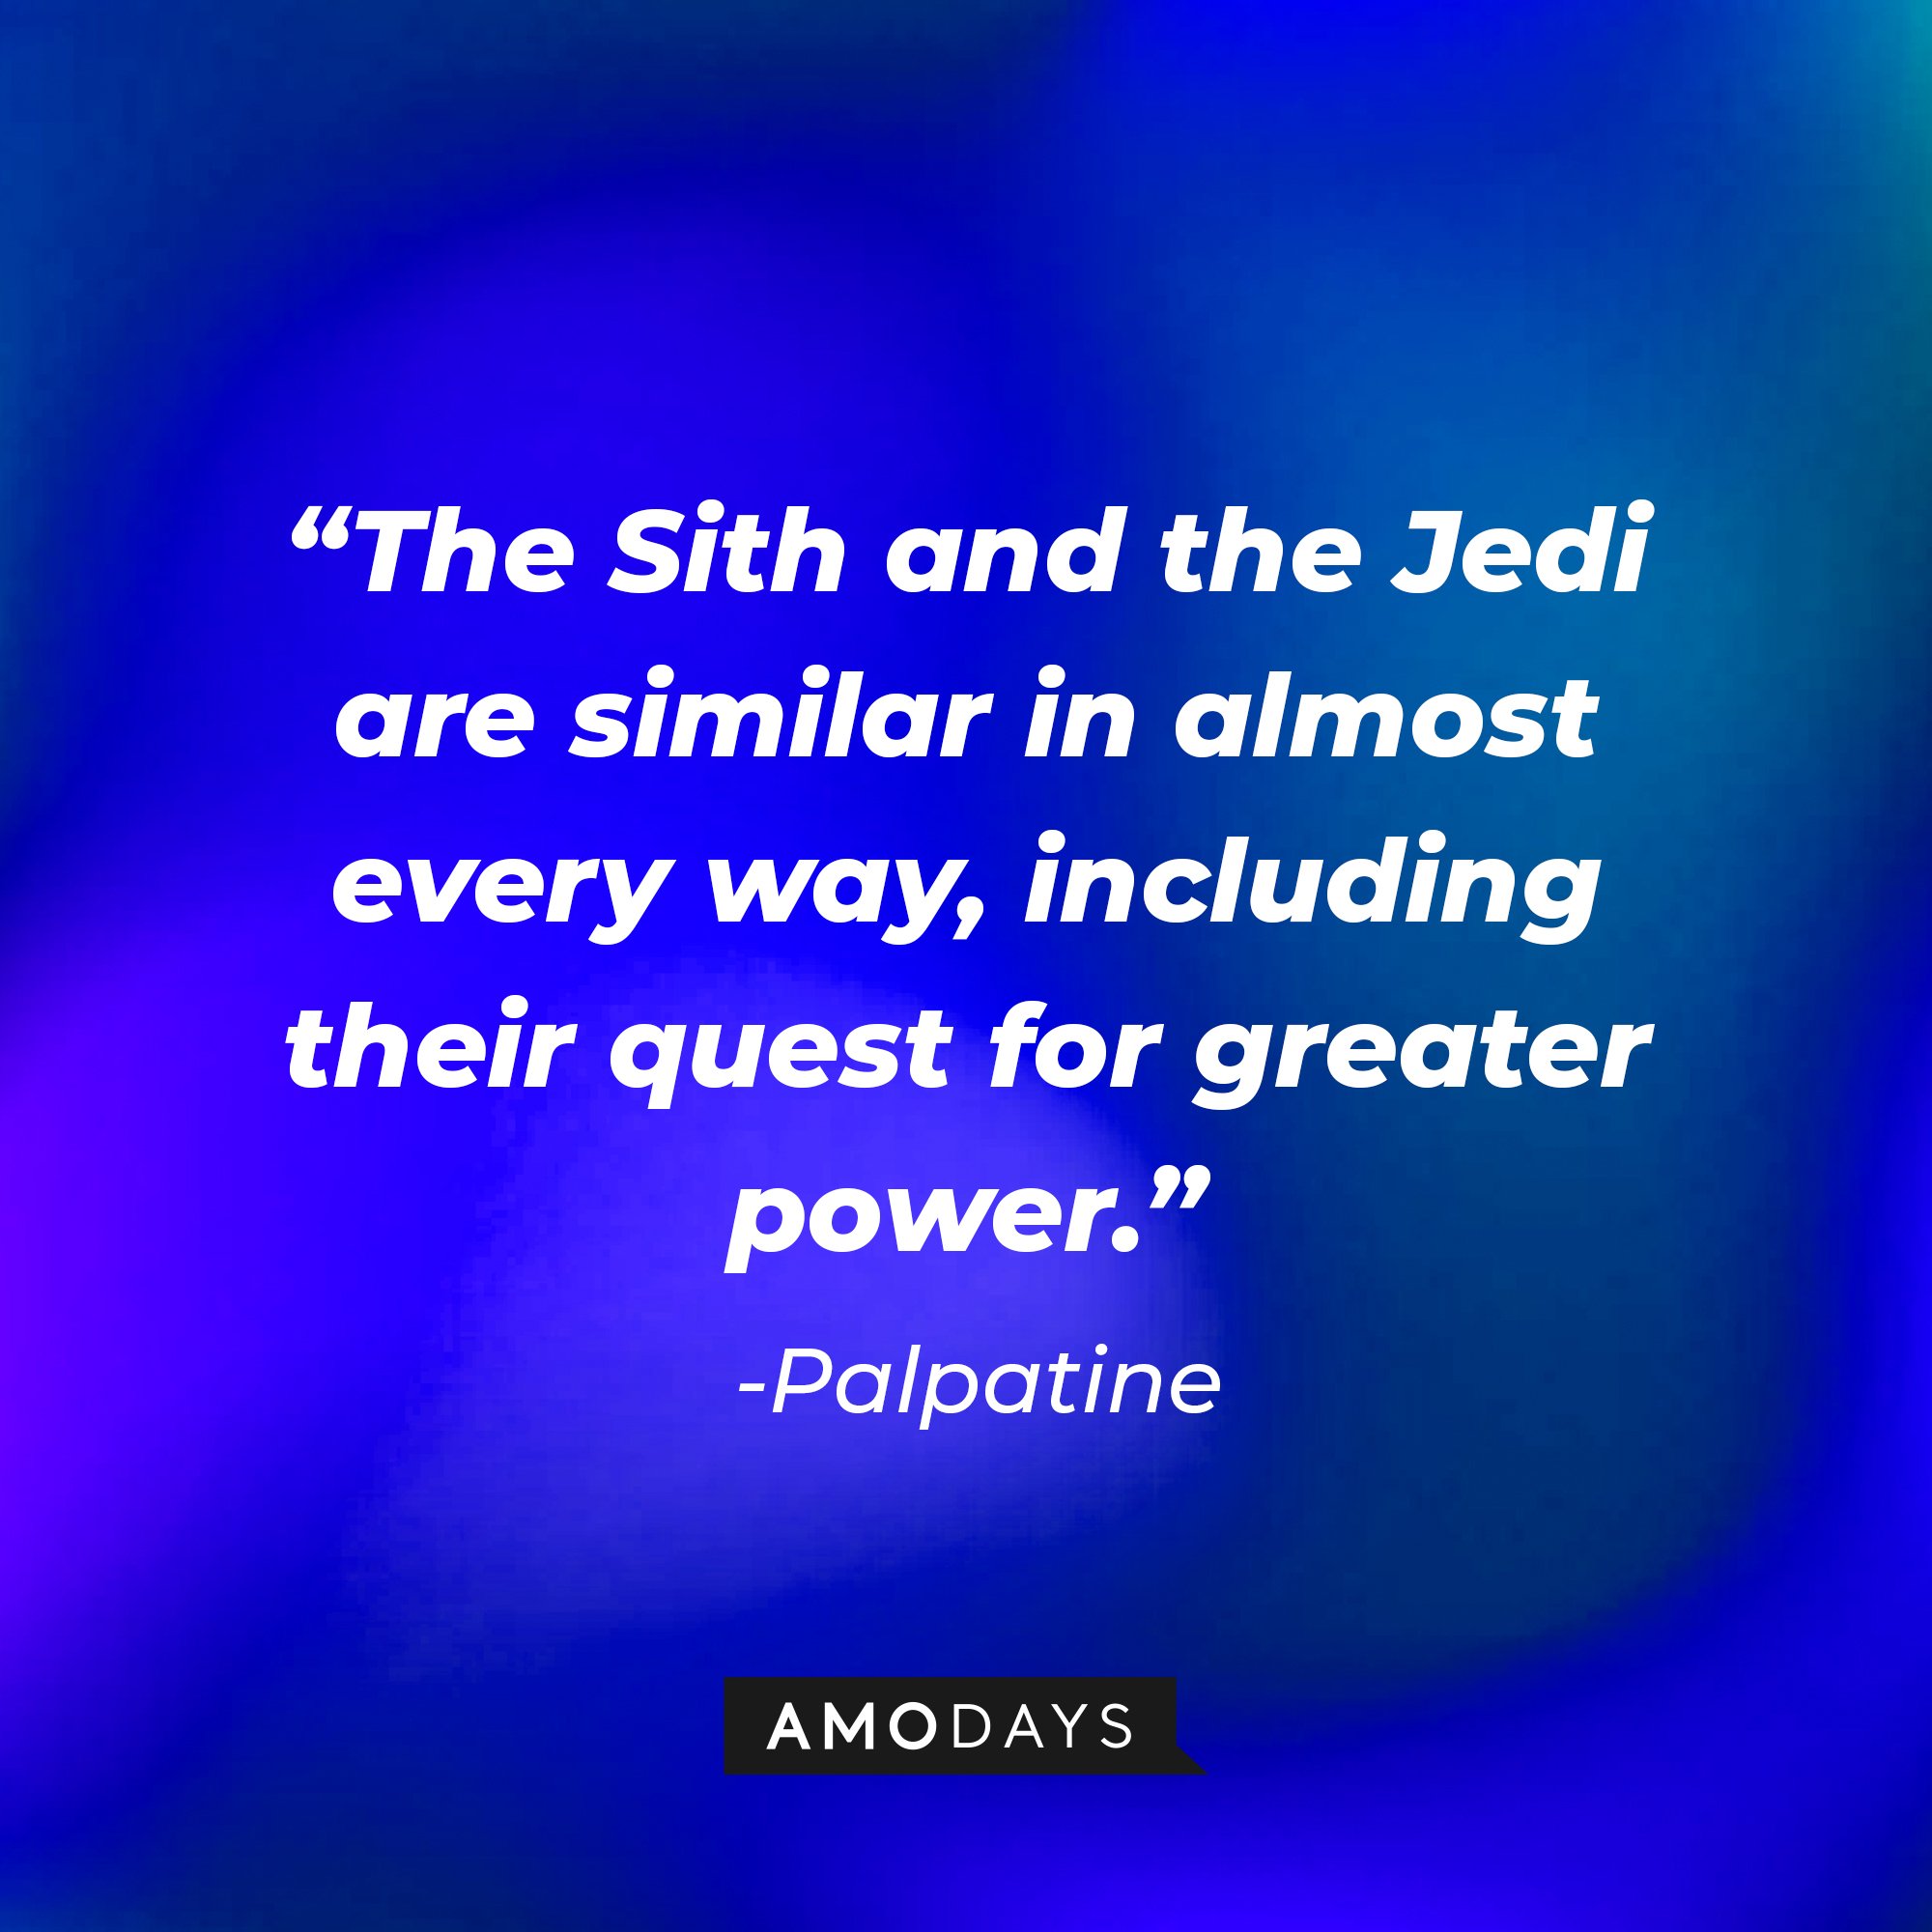 Palpatine's quote: “The Sith and the Jedi are similar in almost every way, including their quest for greater power.” | Image: AmoDays